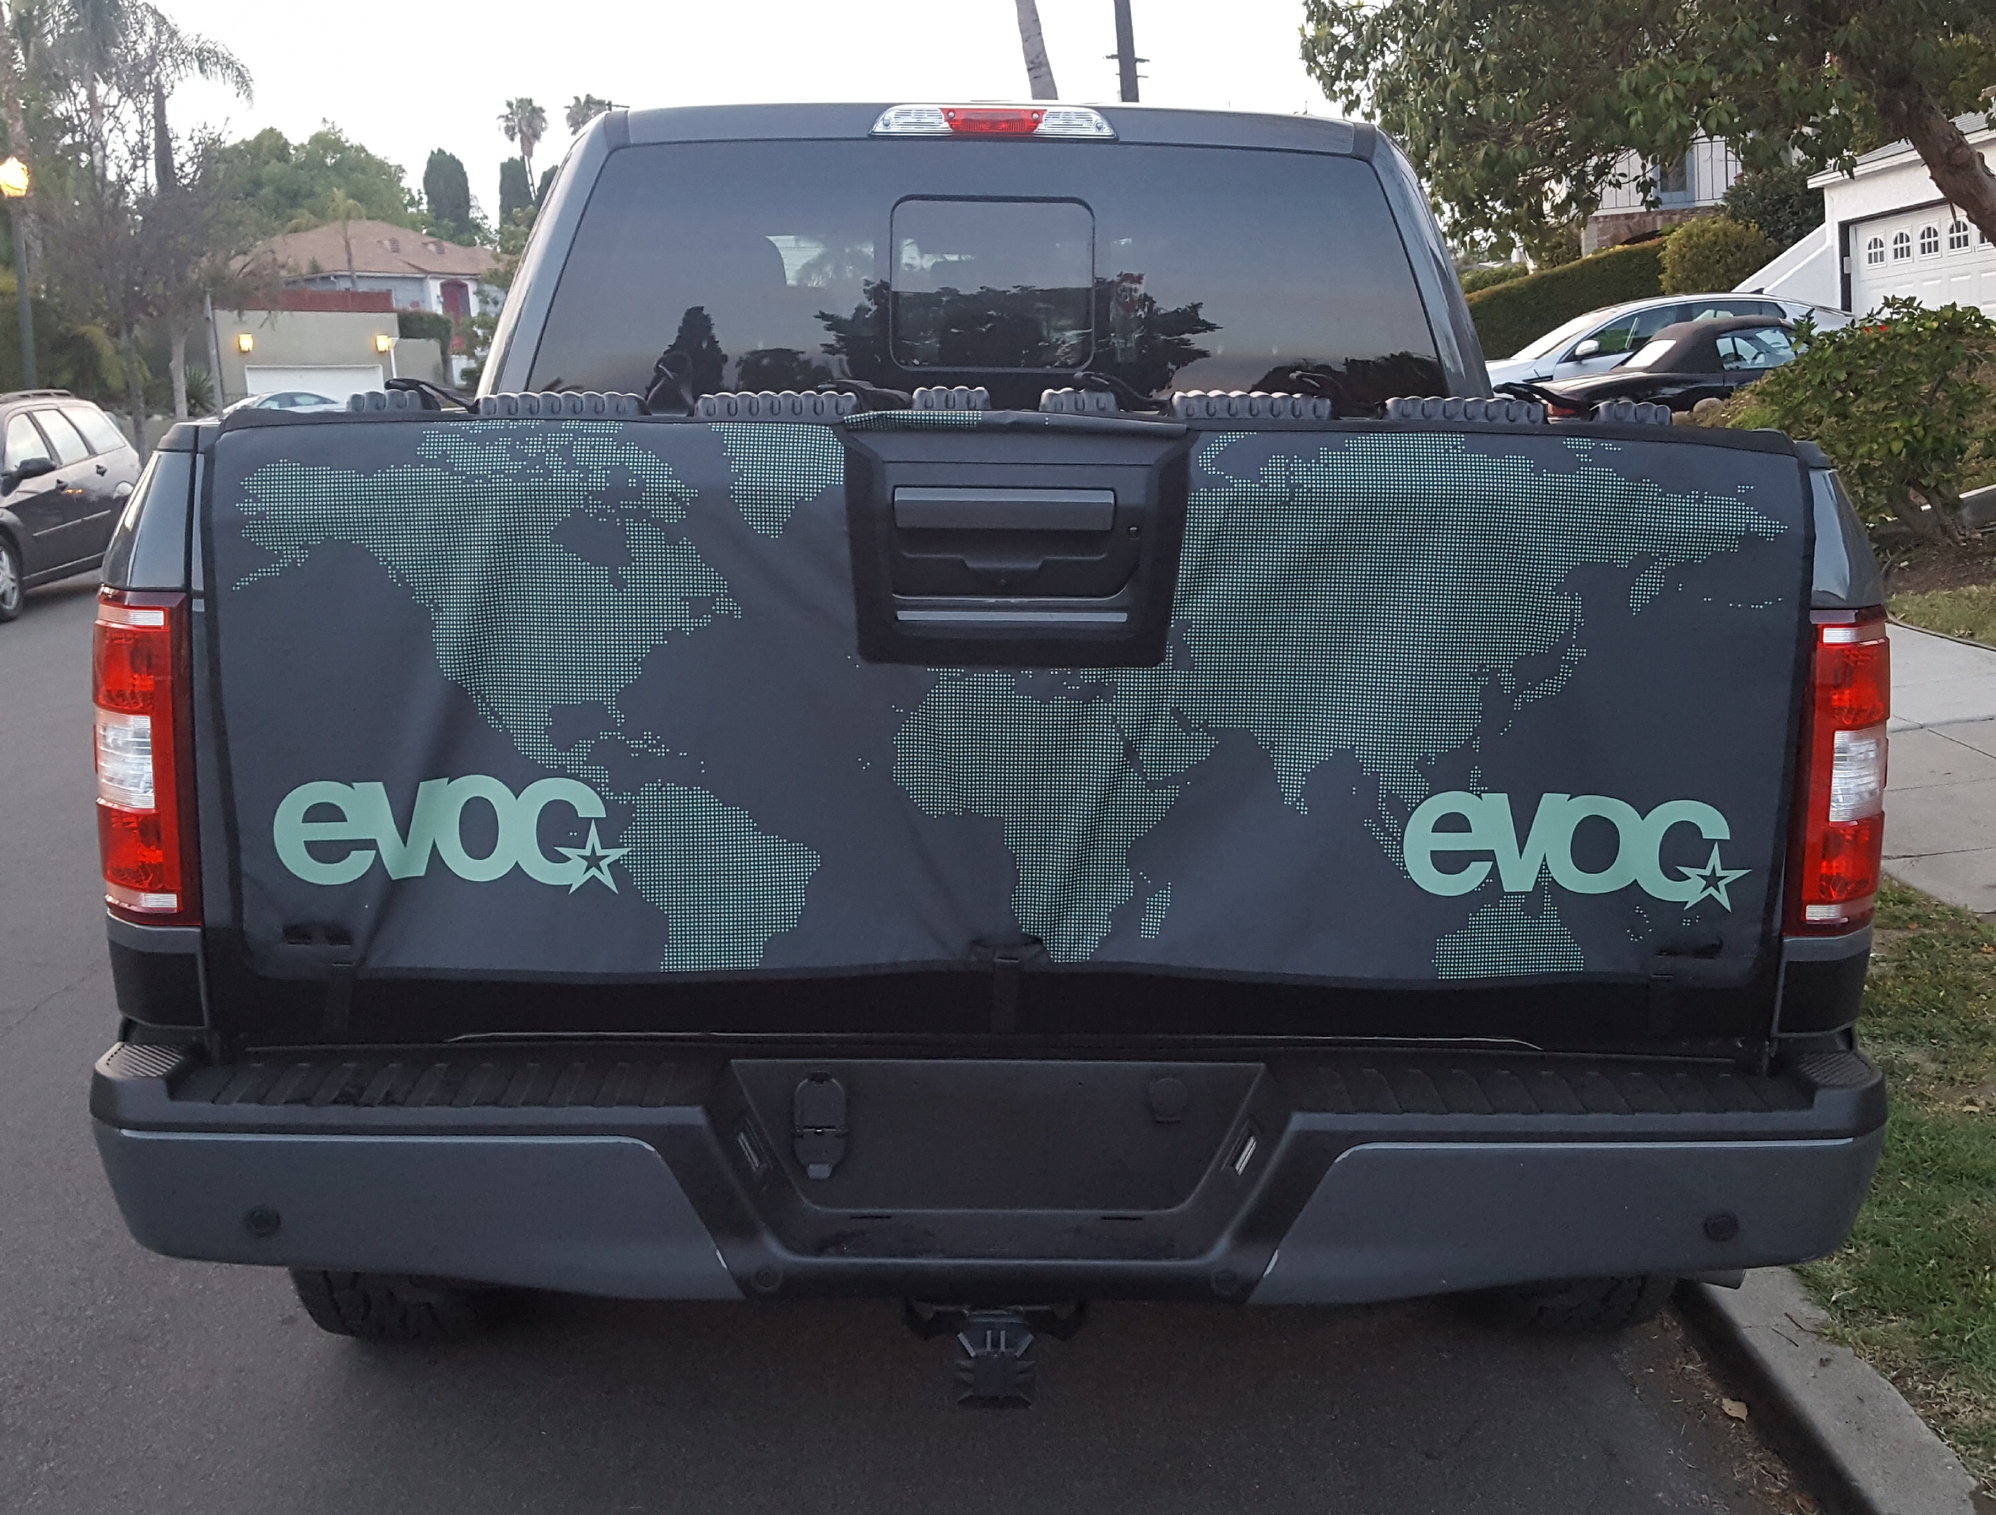 Black Evoc Tailgate Pad DUO for Pickup Truck to Transport Bikes